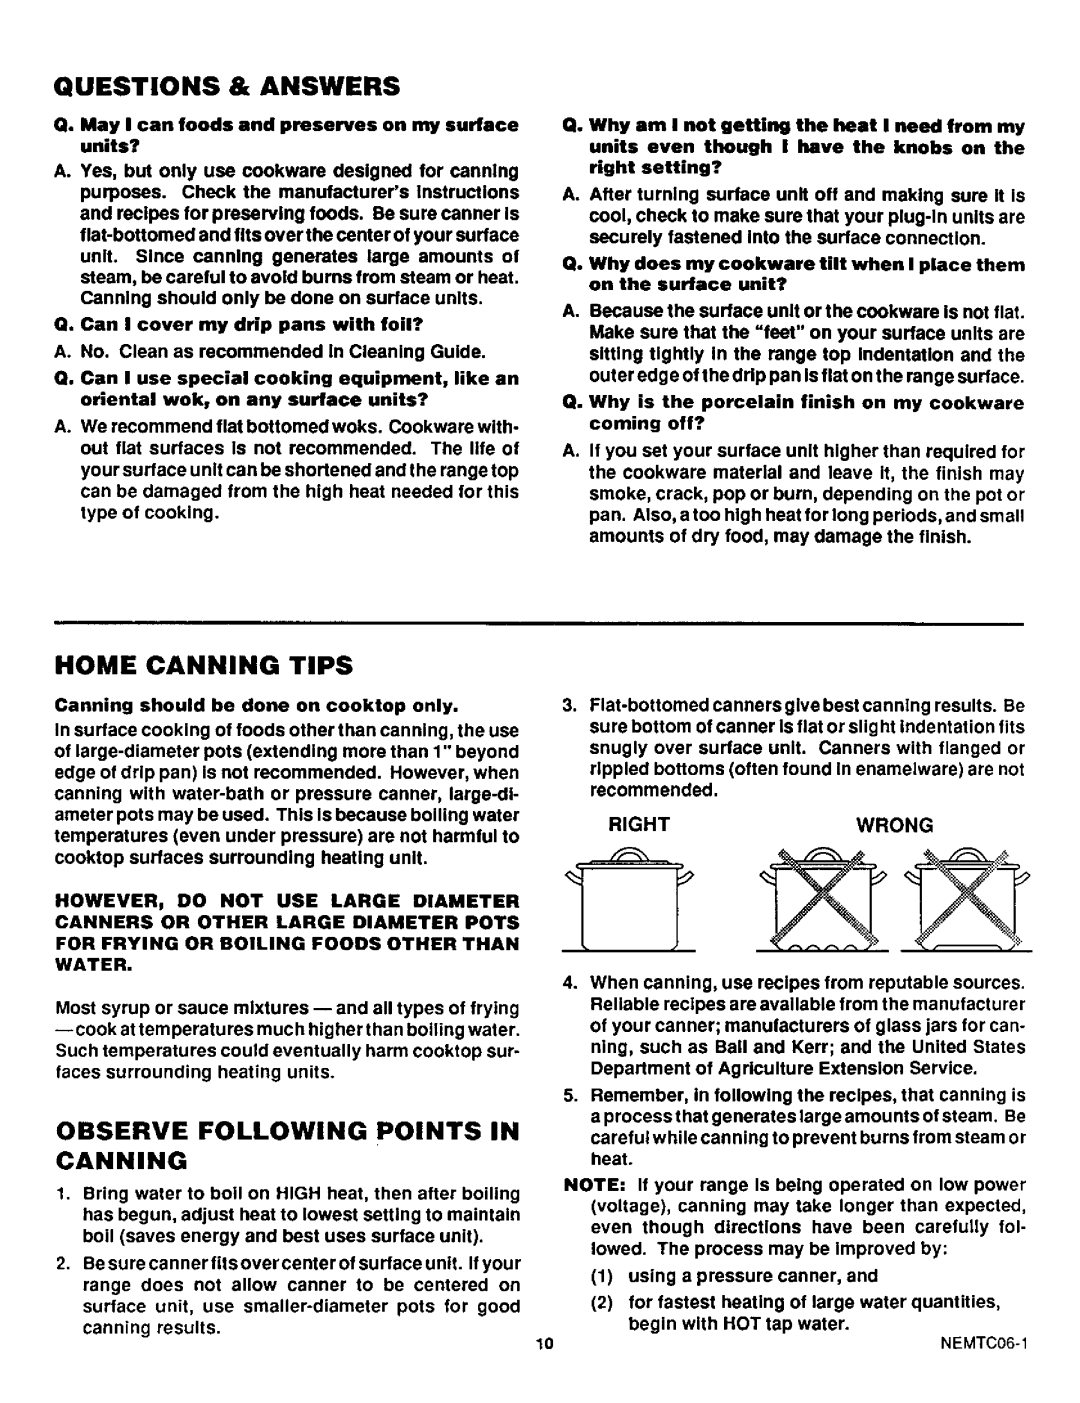 Sears 45520, 45521 warranty Questions & Answers, Home Canning Tips, Observe Following Points In Canning 